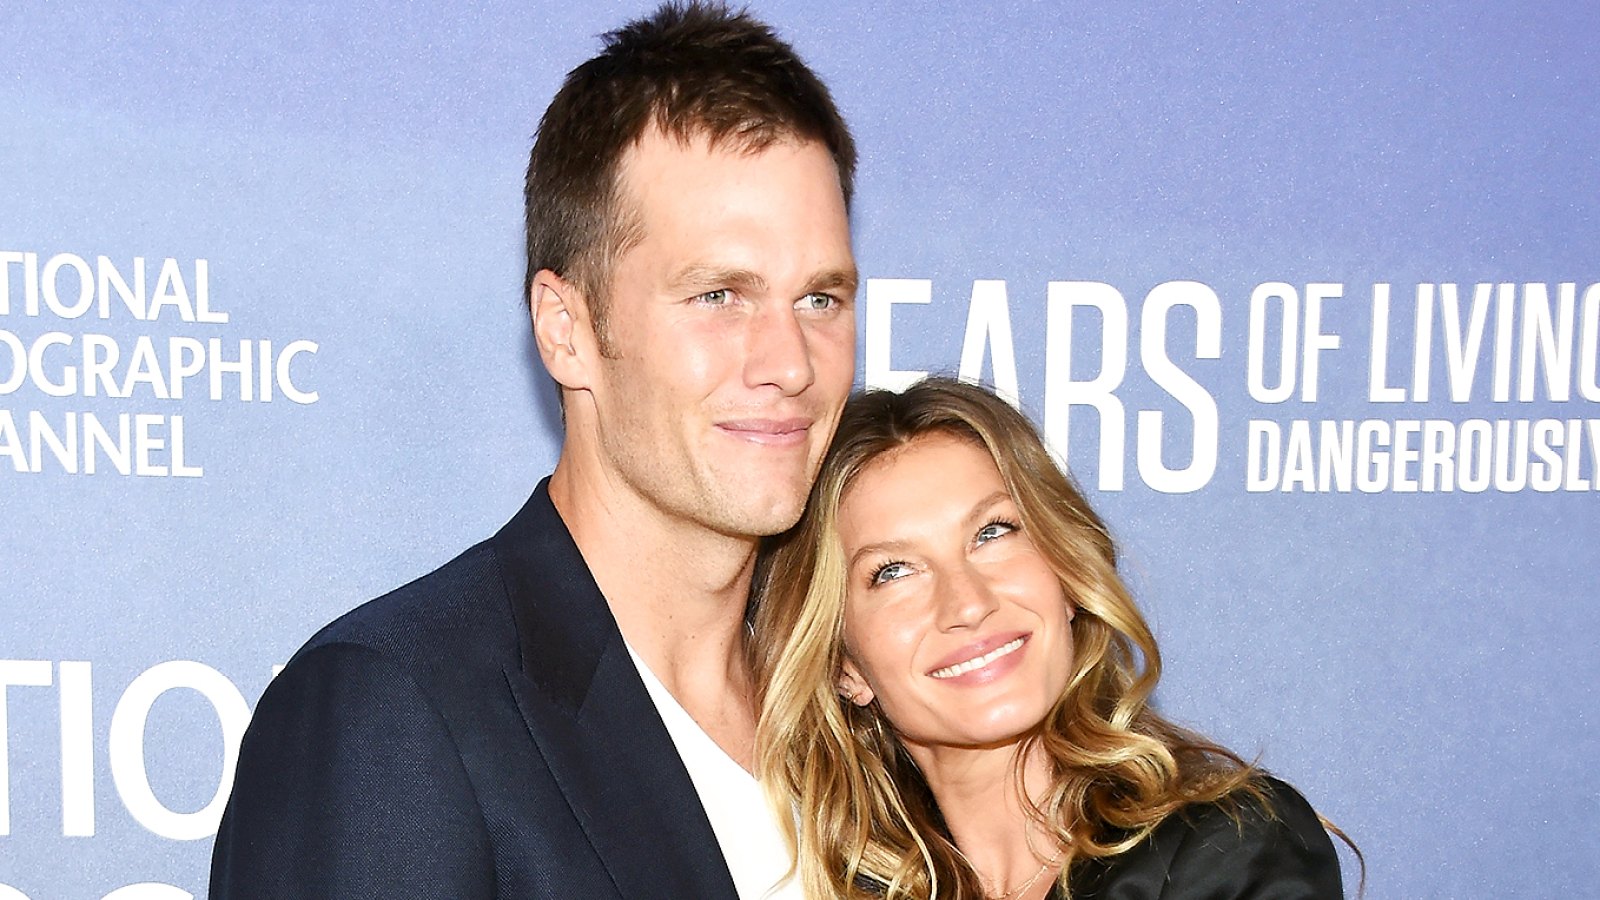 Tom Brady and Gisele Bundchen attend National Geographic's "Years Of Living Dangerously" new season world premiere at the American Museum of Natural History on September 21, 2016 in New York City.